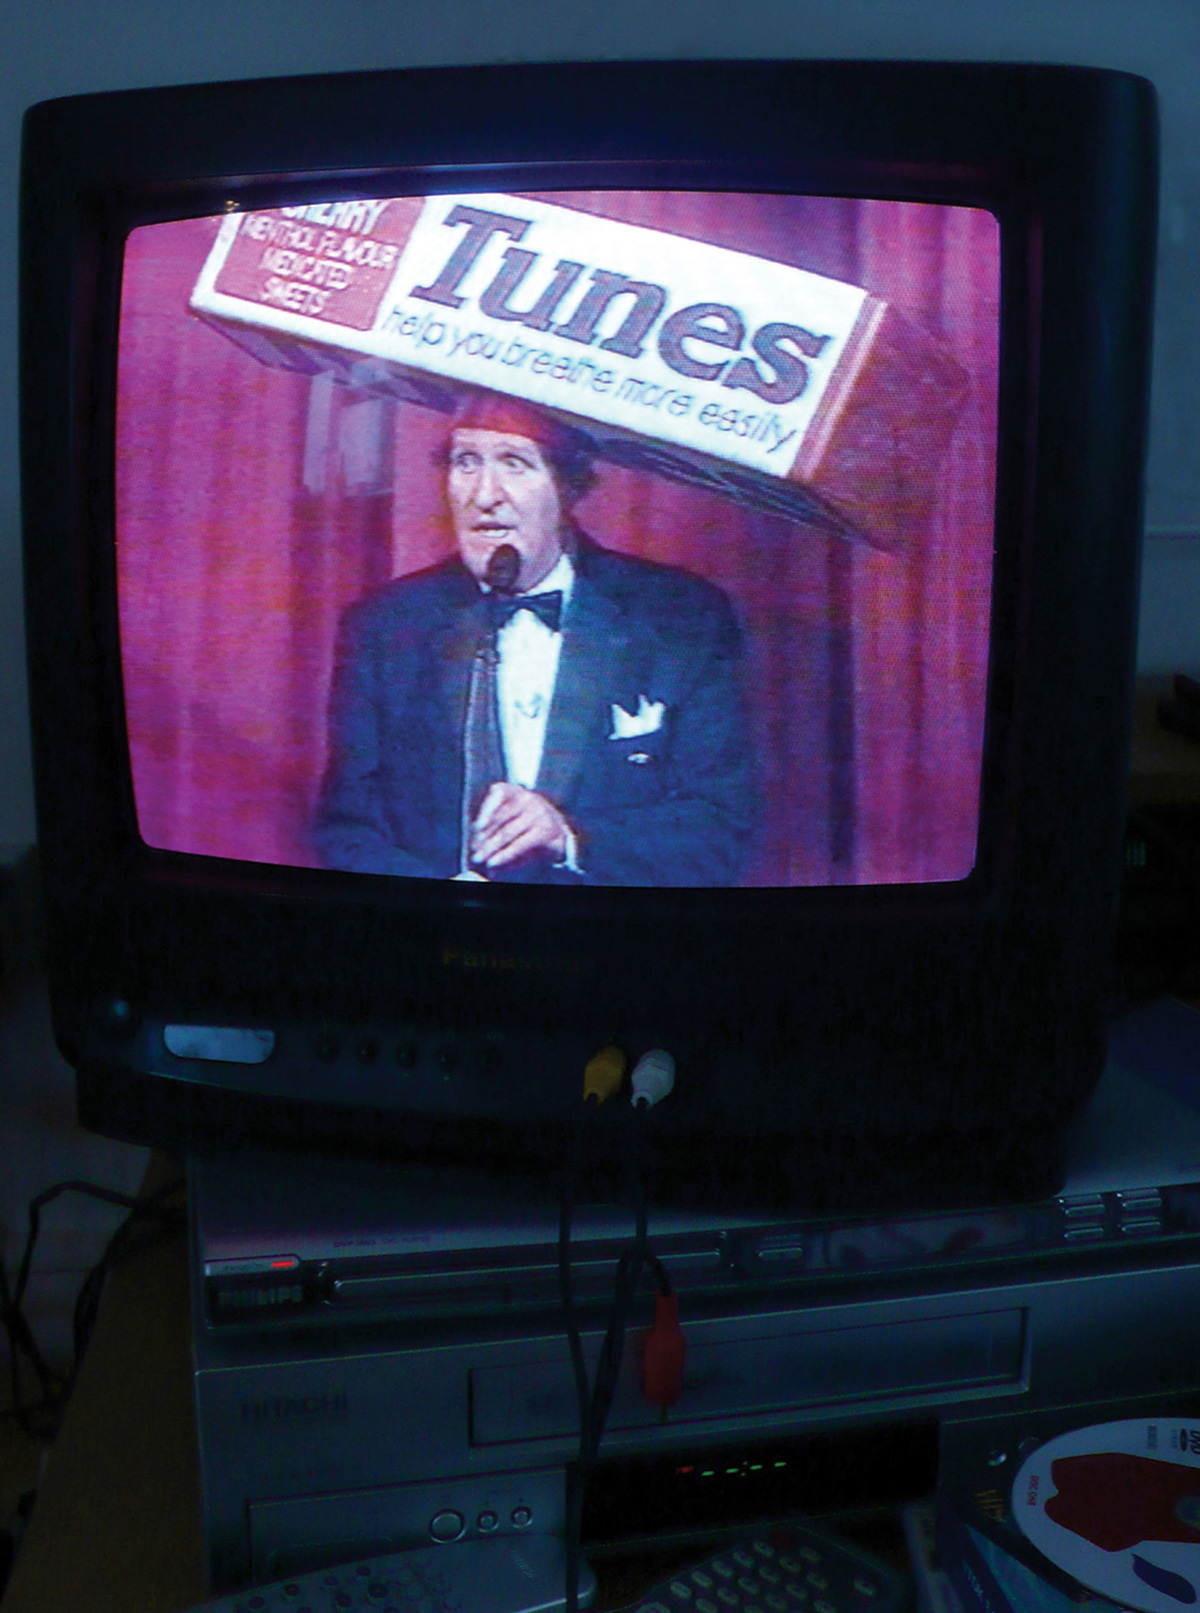 A photograph of Tommy Cooper on a television screen.